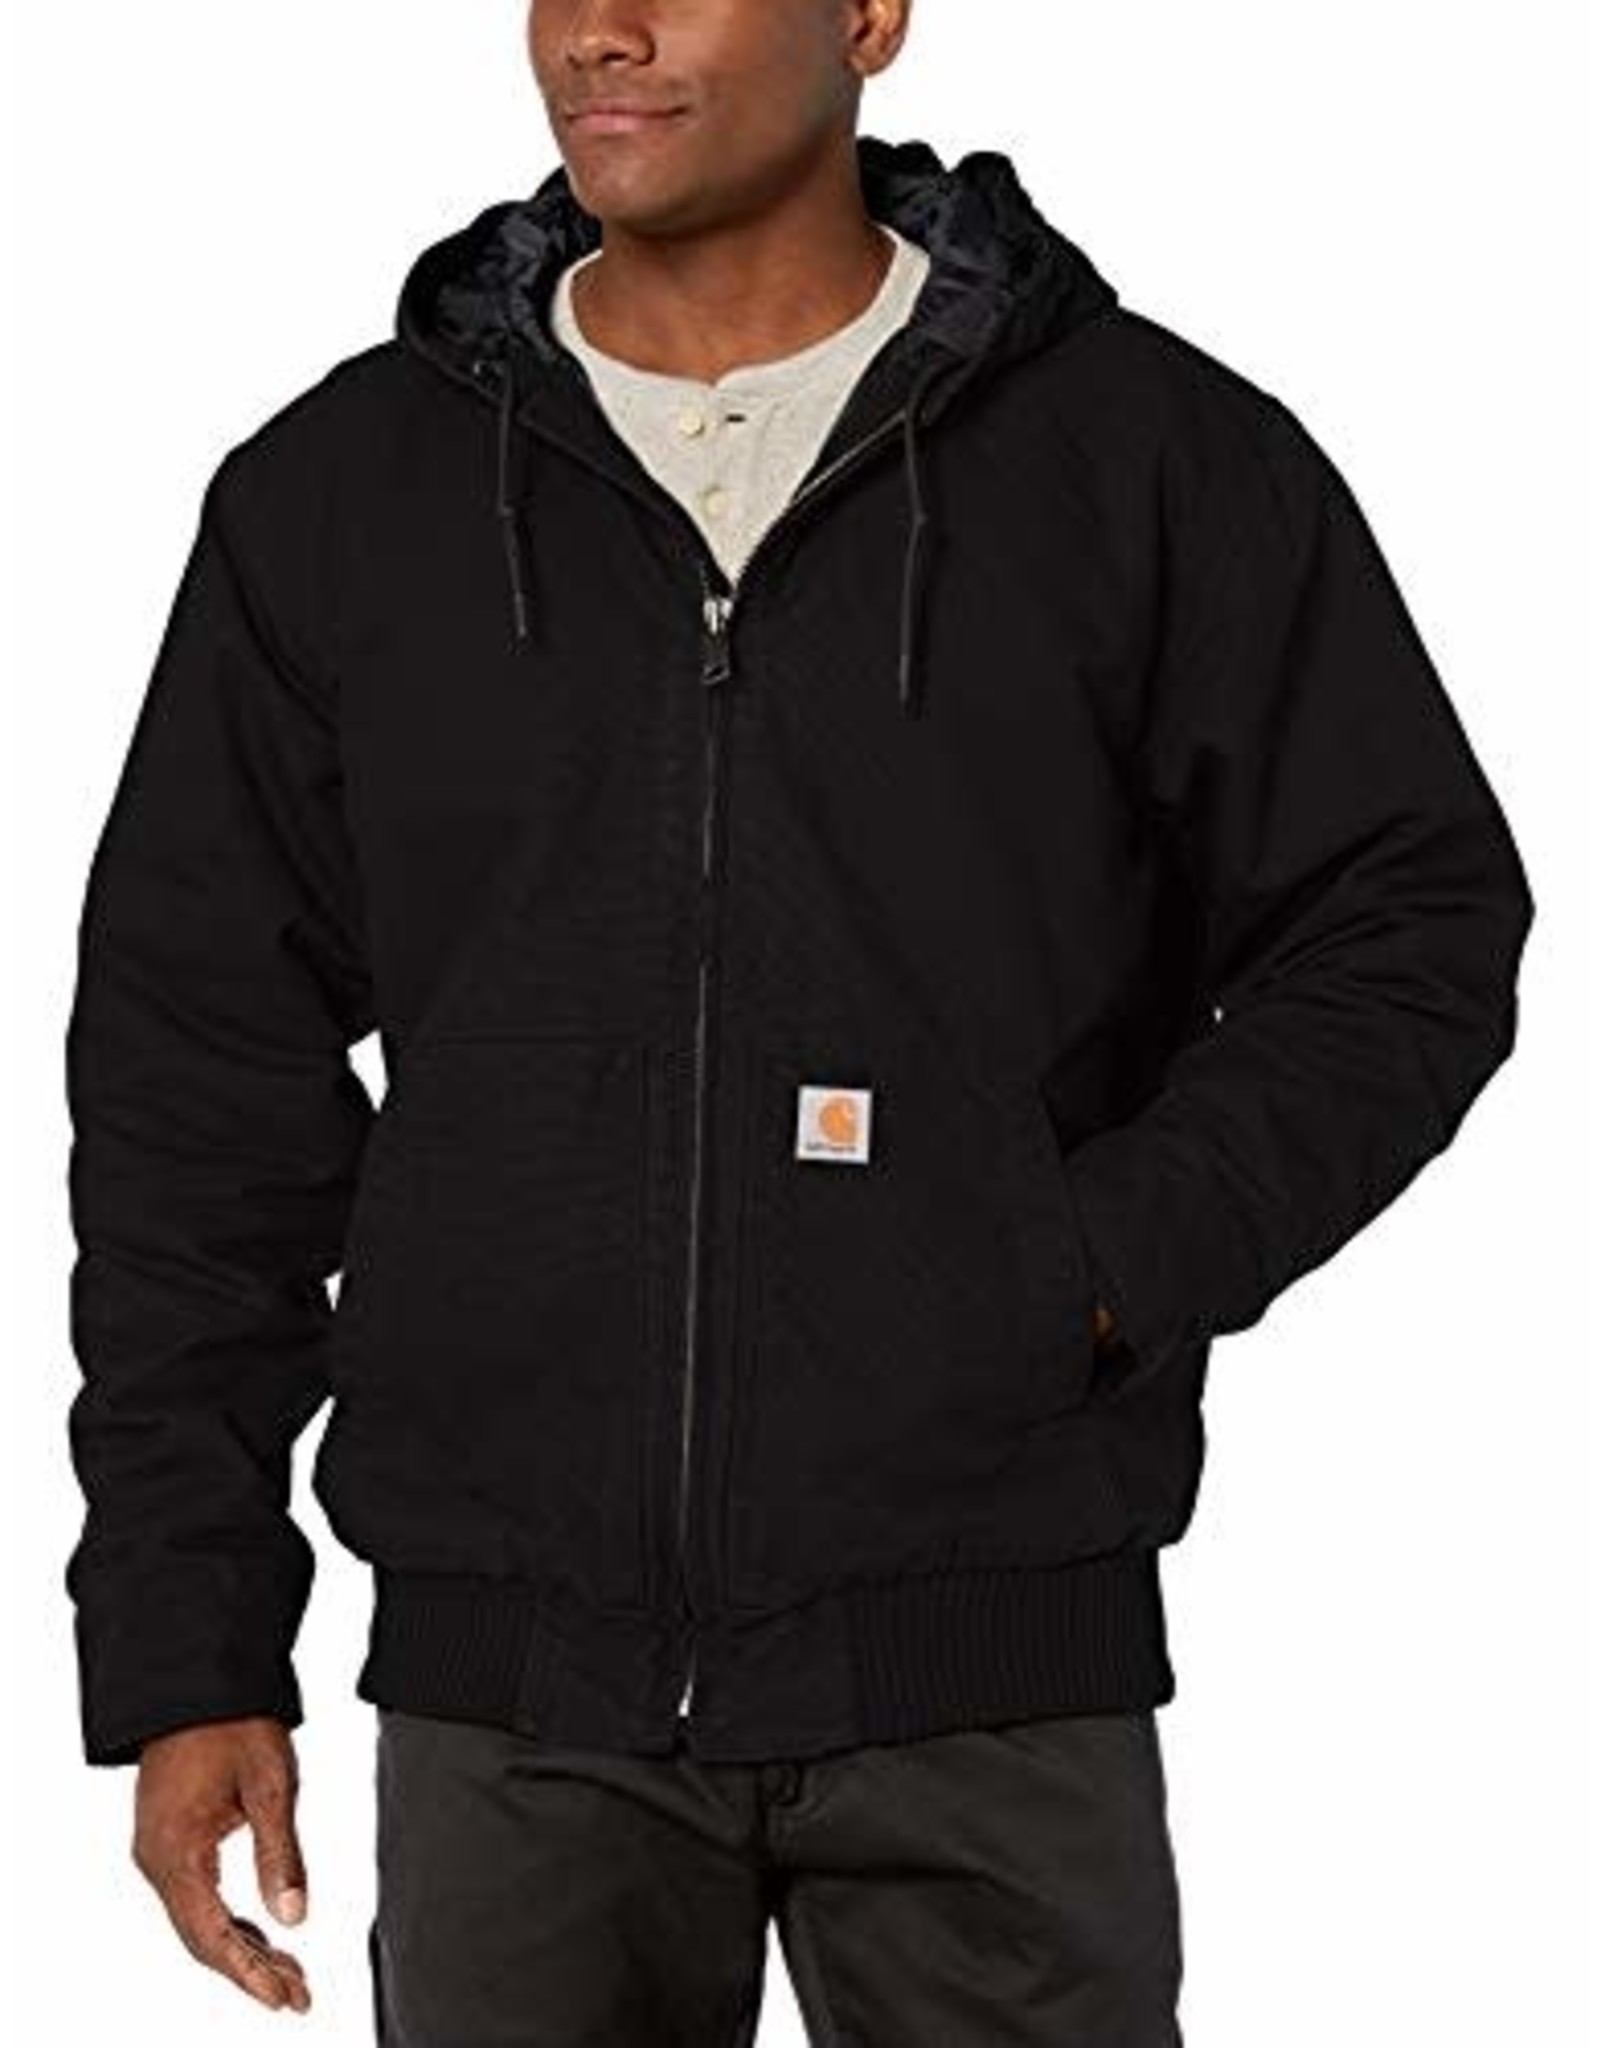 Carhartt Men's Black J130 Washed Active Jacket 104050 Xlg - Nelson Royal's